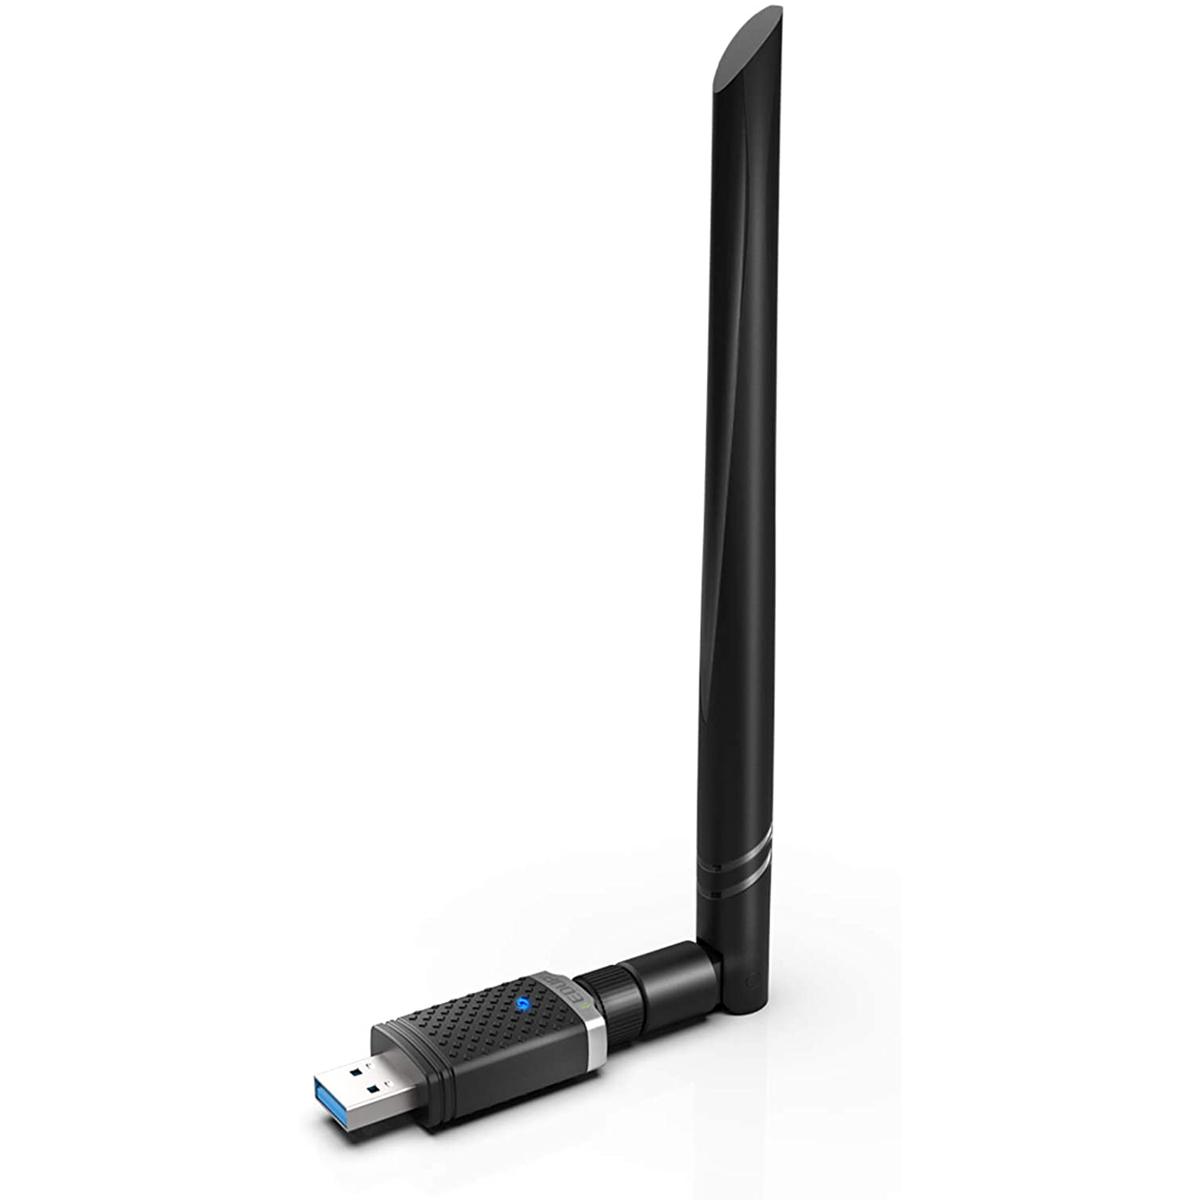 EDUP Dual Band 802.11 AC USB 3.1 Wifi Adapter for $9.49